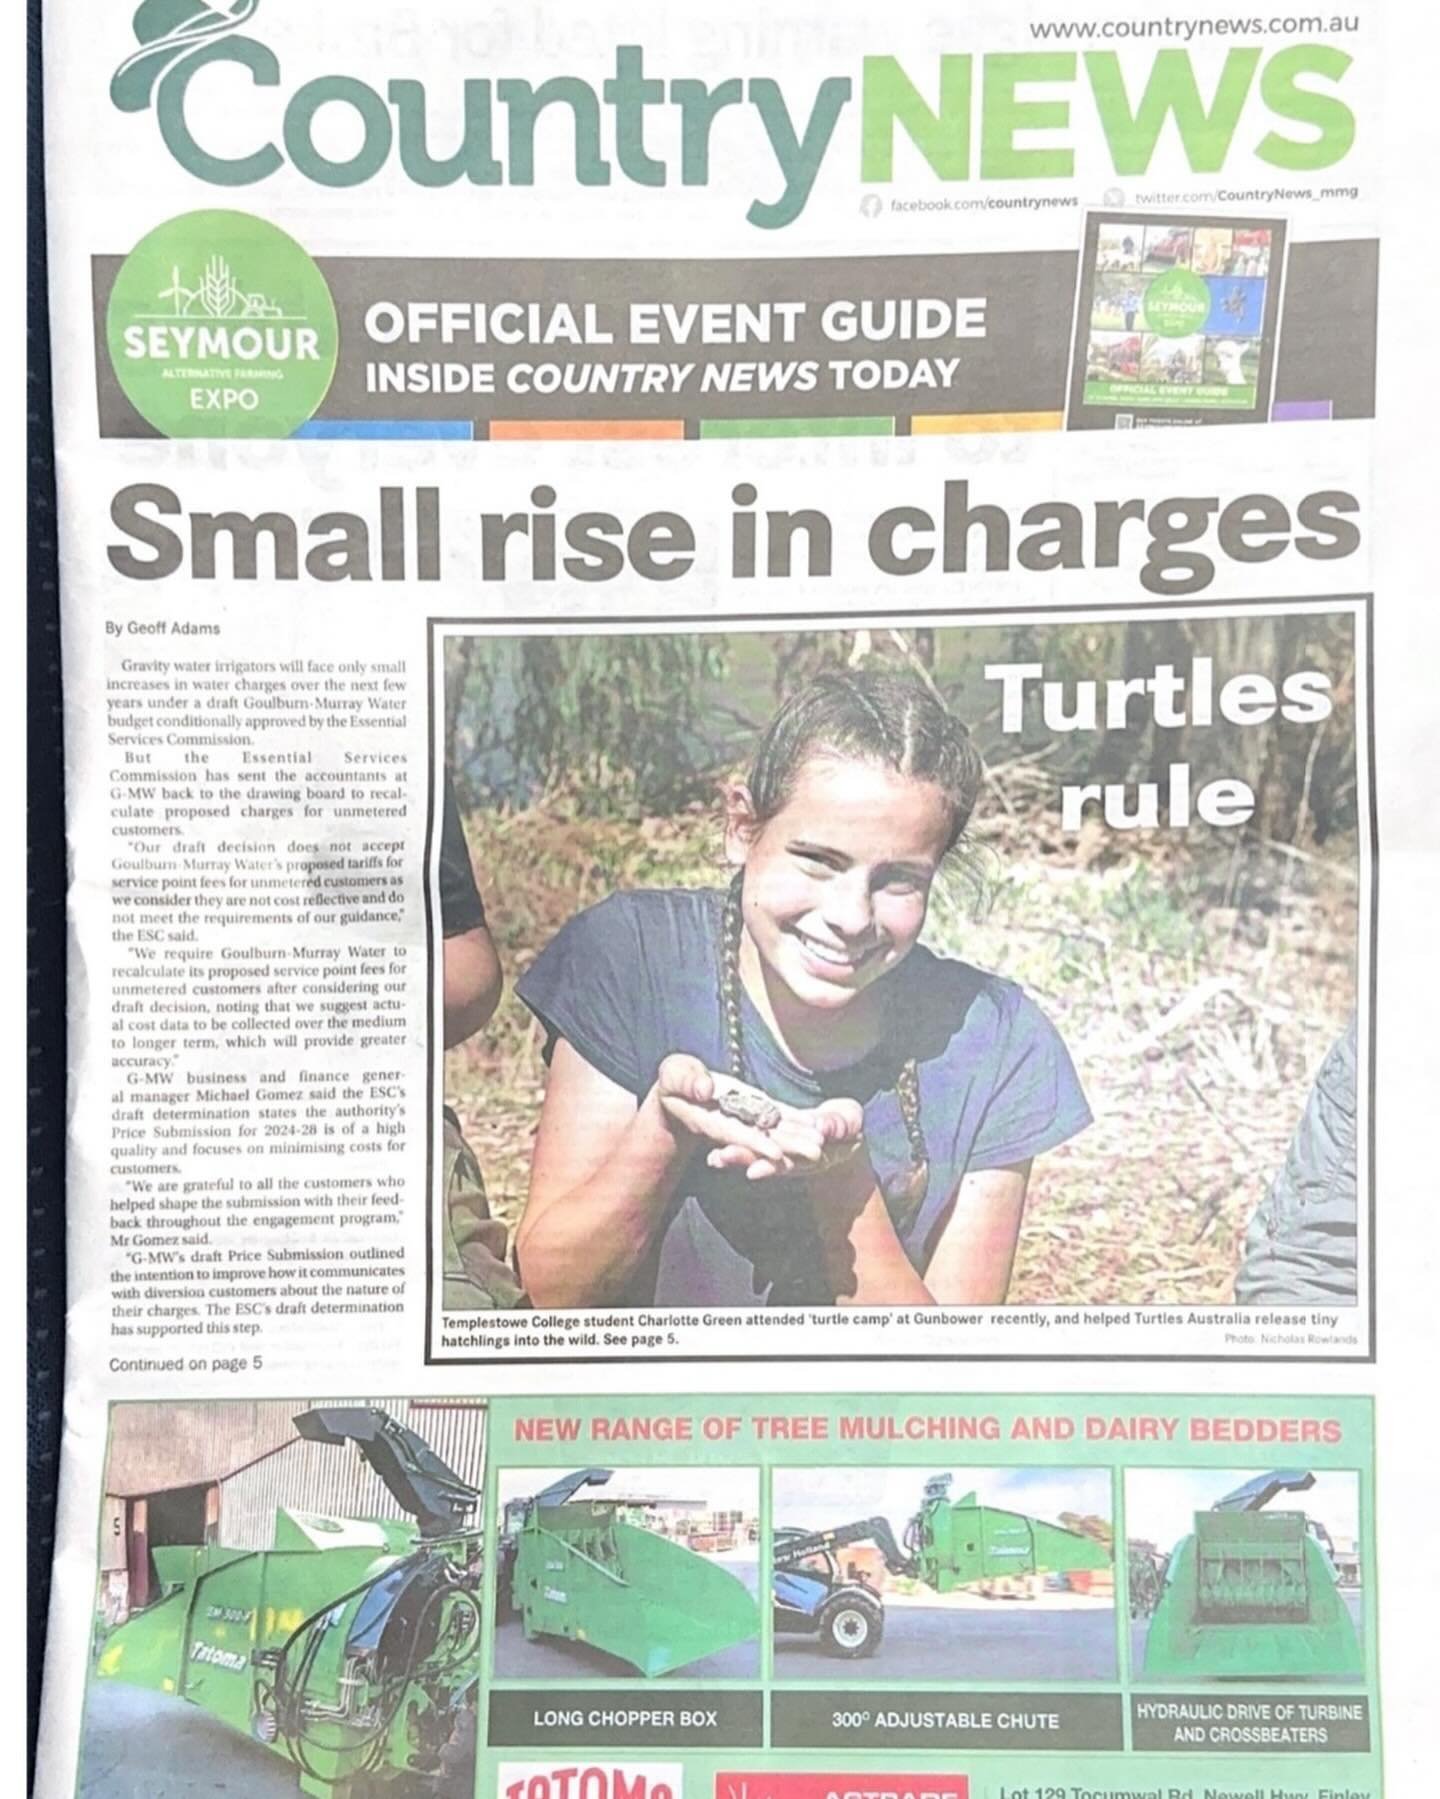 Awesome piece in the Country News about our time in Gunbower on Turtle Camp in term 1!